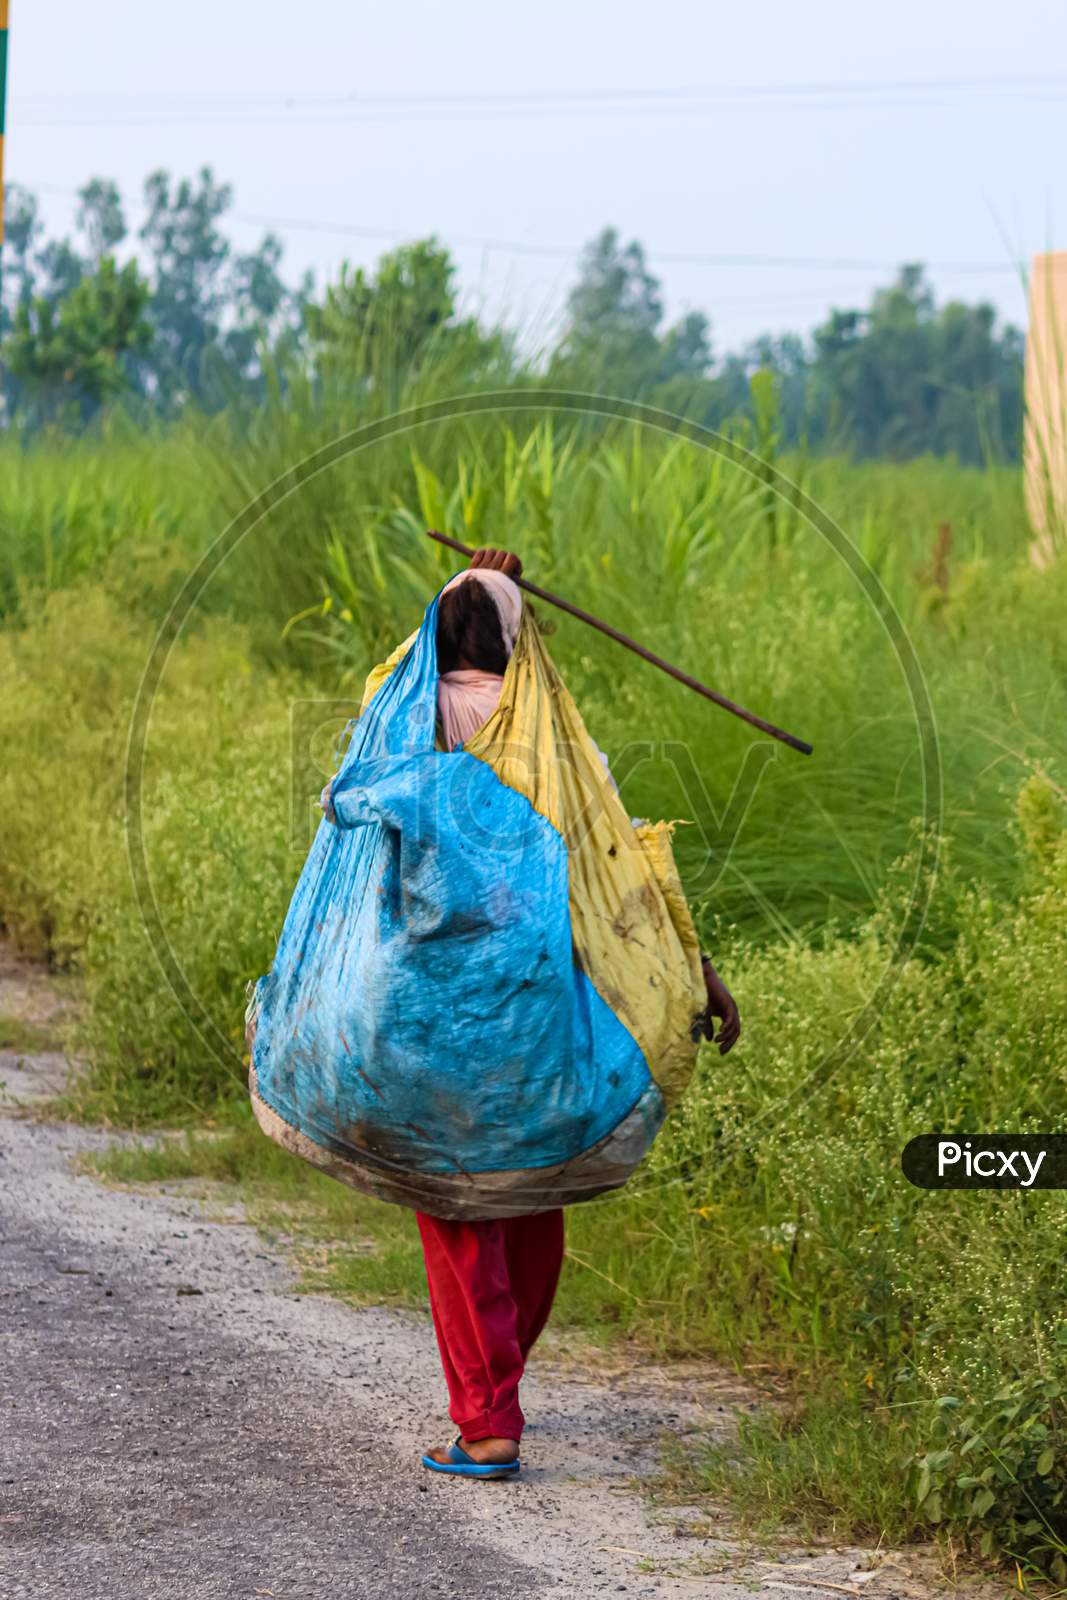 ragpicker women carrying the ragged plastic for recycle